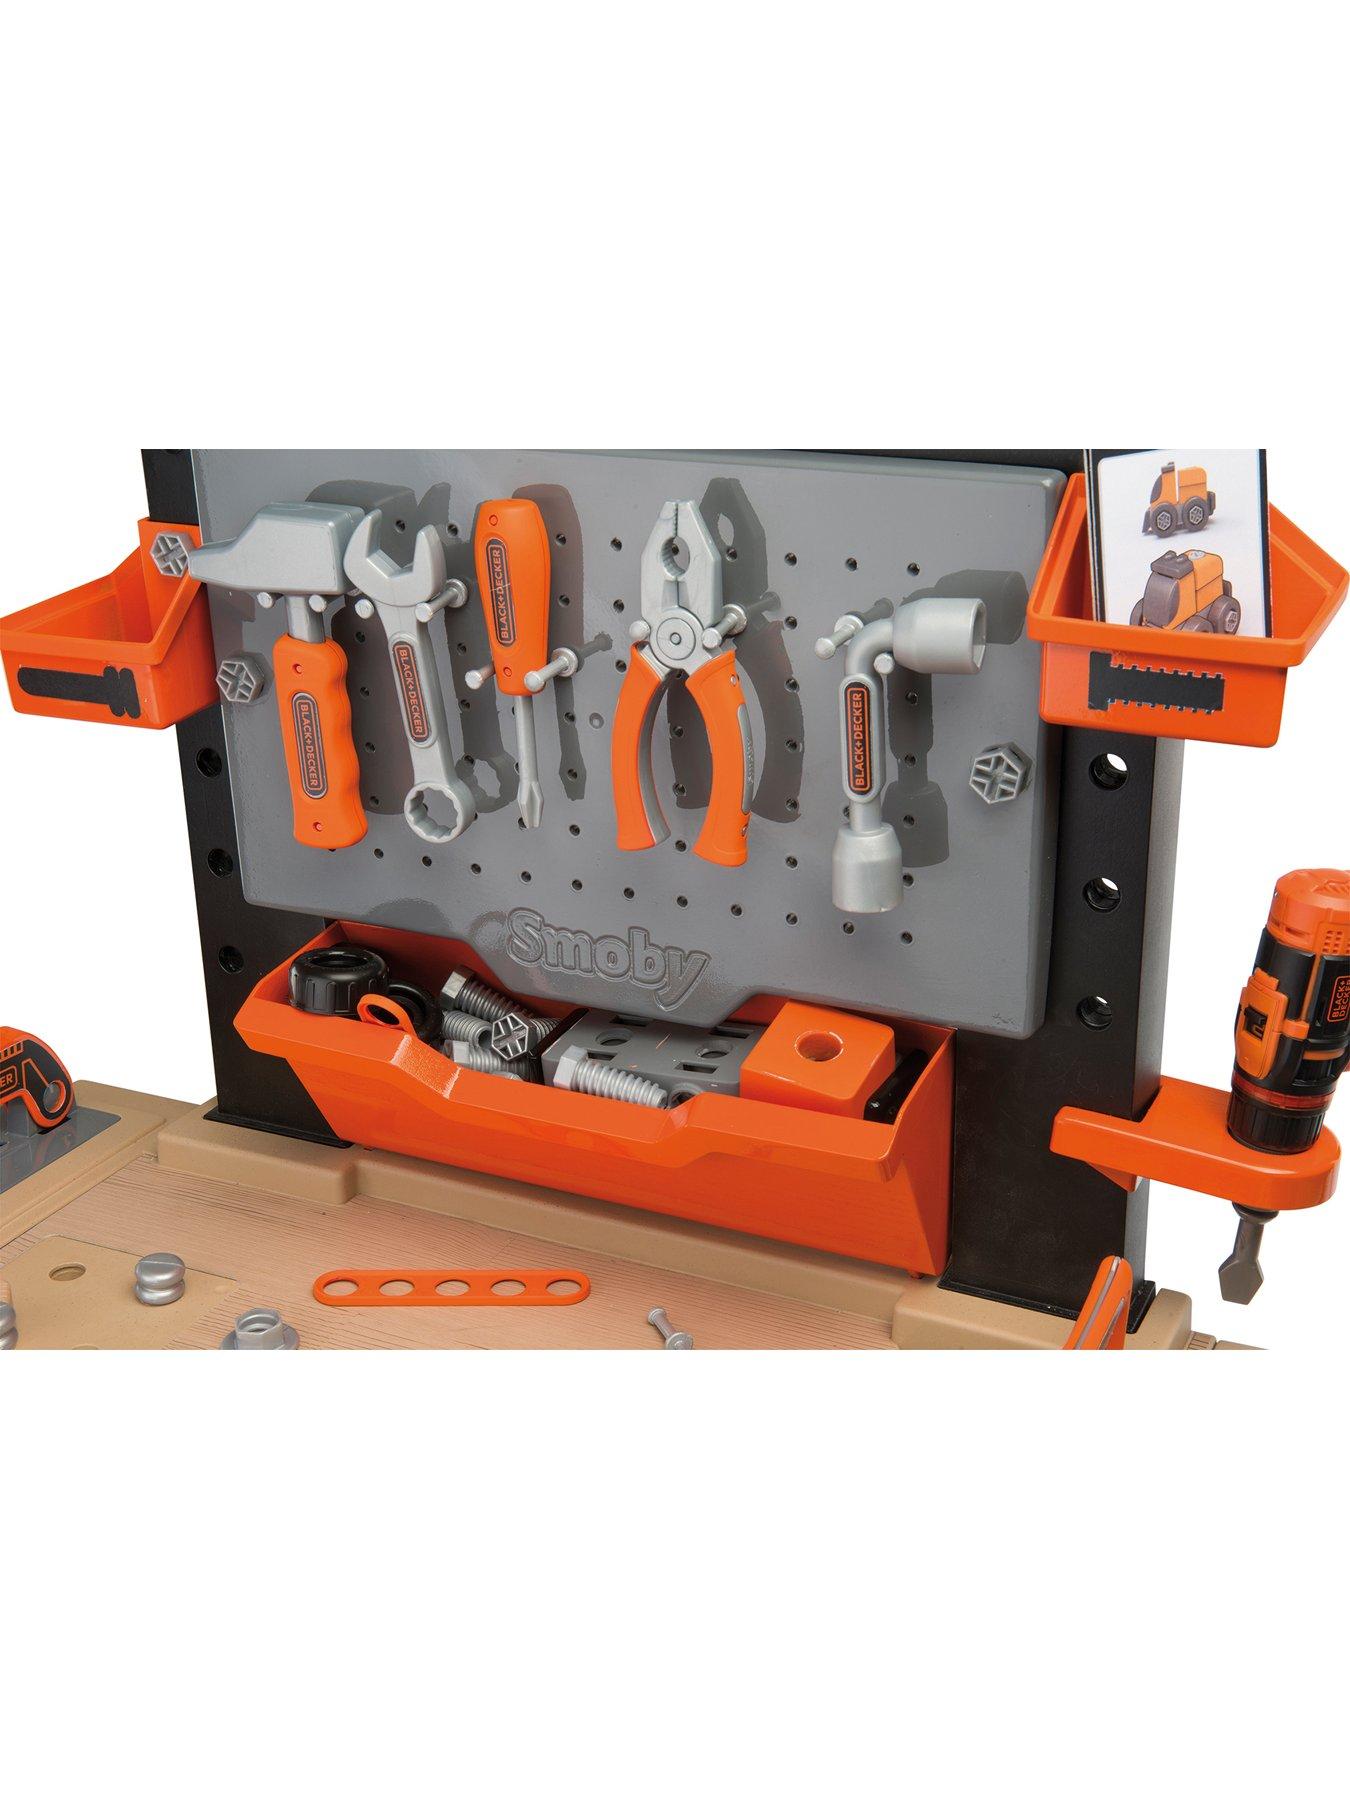 Black And Decker Kids' Workbench Review, by Thomas Smith